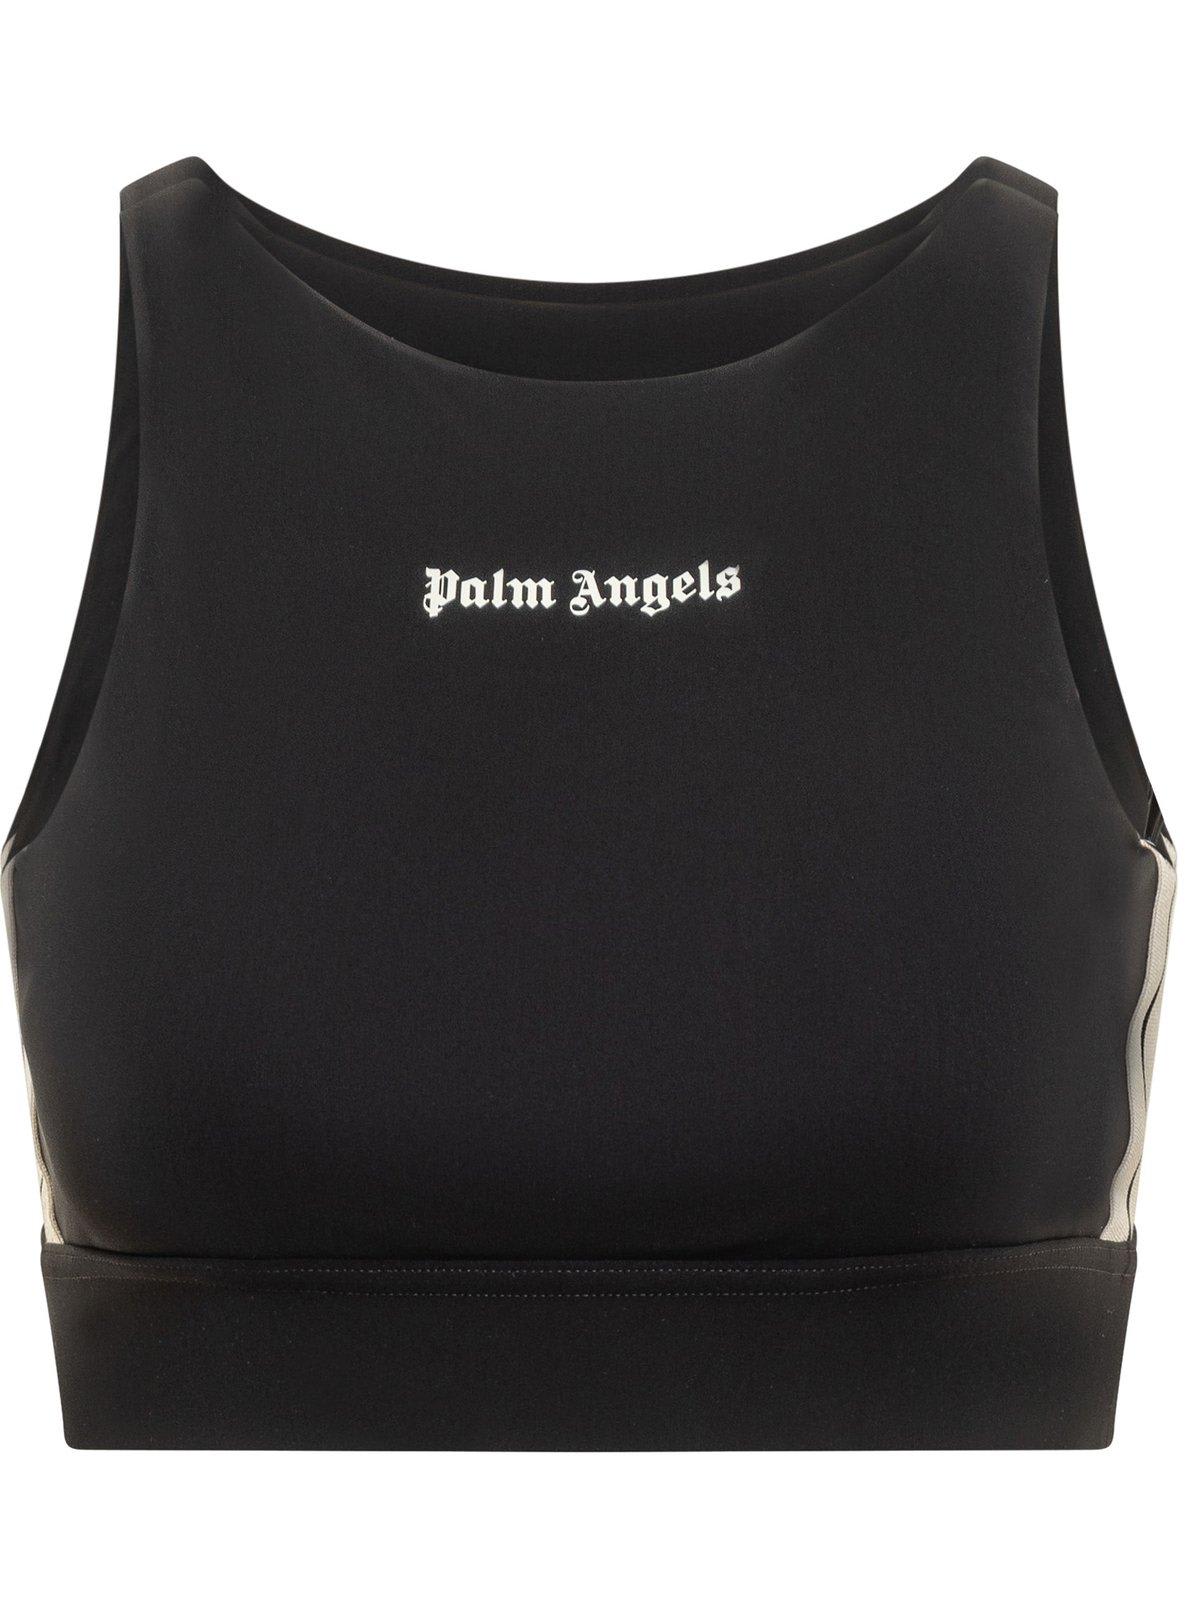 Palm Angels Logo Printed Sports Top In Black